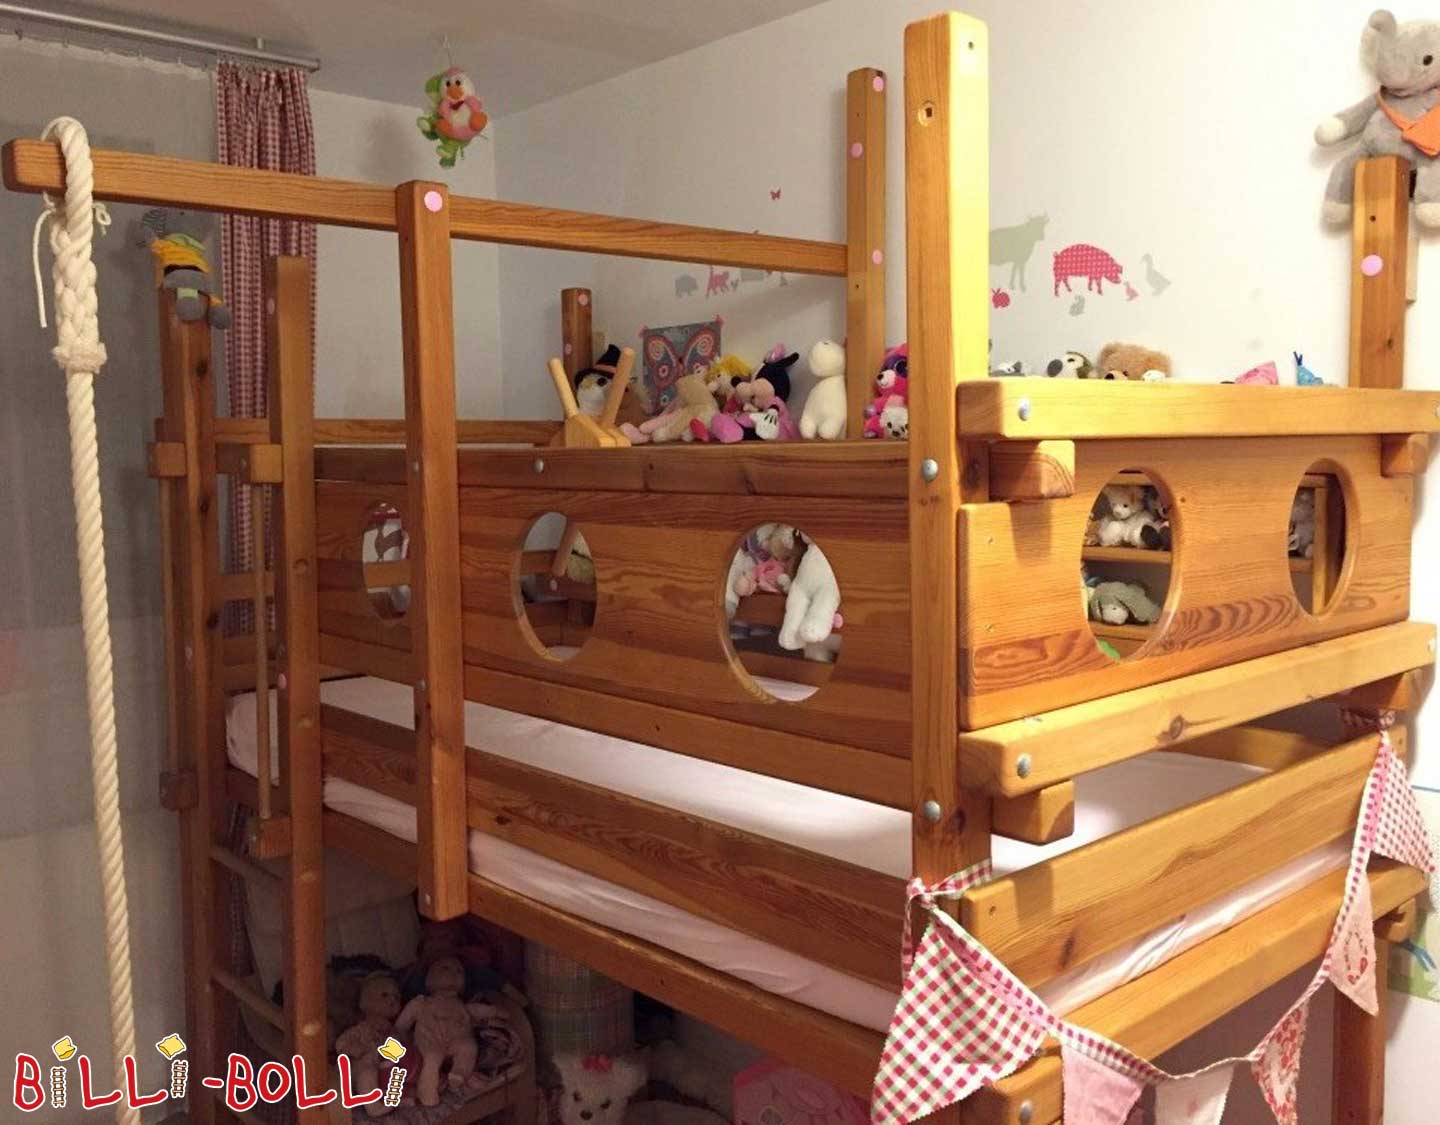 Well-kept growing loft bed (Category: second hand loft bed)